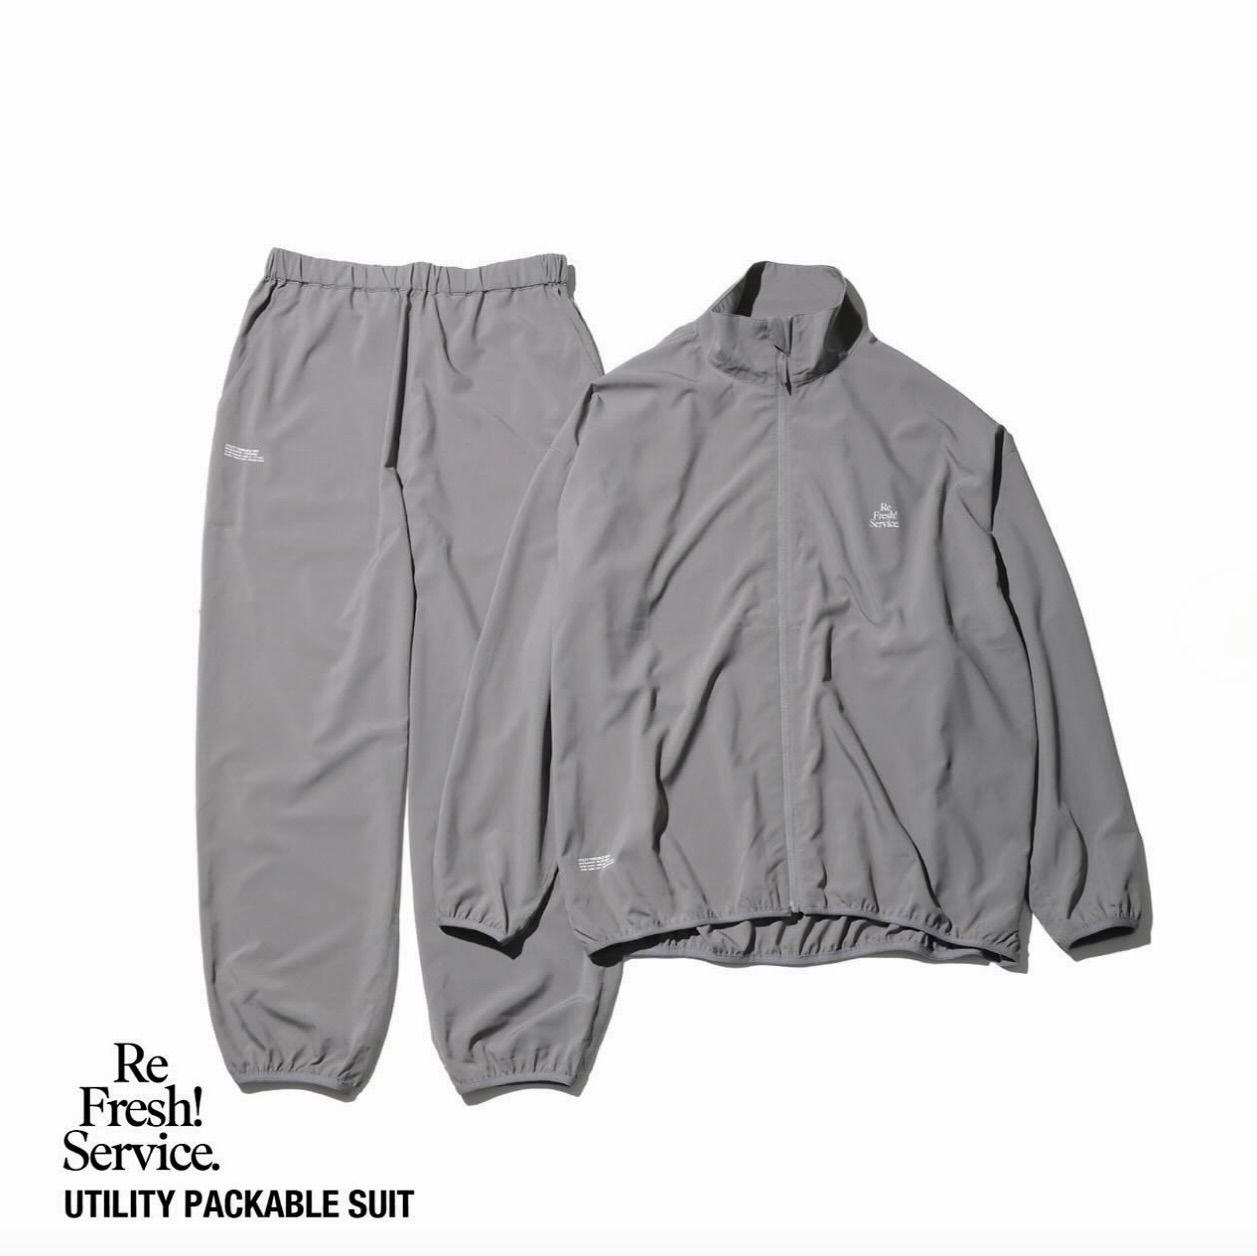 ReFresh!Service. 24SS “UTILITY PACKABLE  SUIT”(FSR241-60155)GRAY☆3月30日(土)発売！！ - M